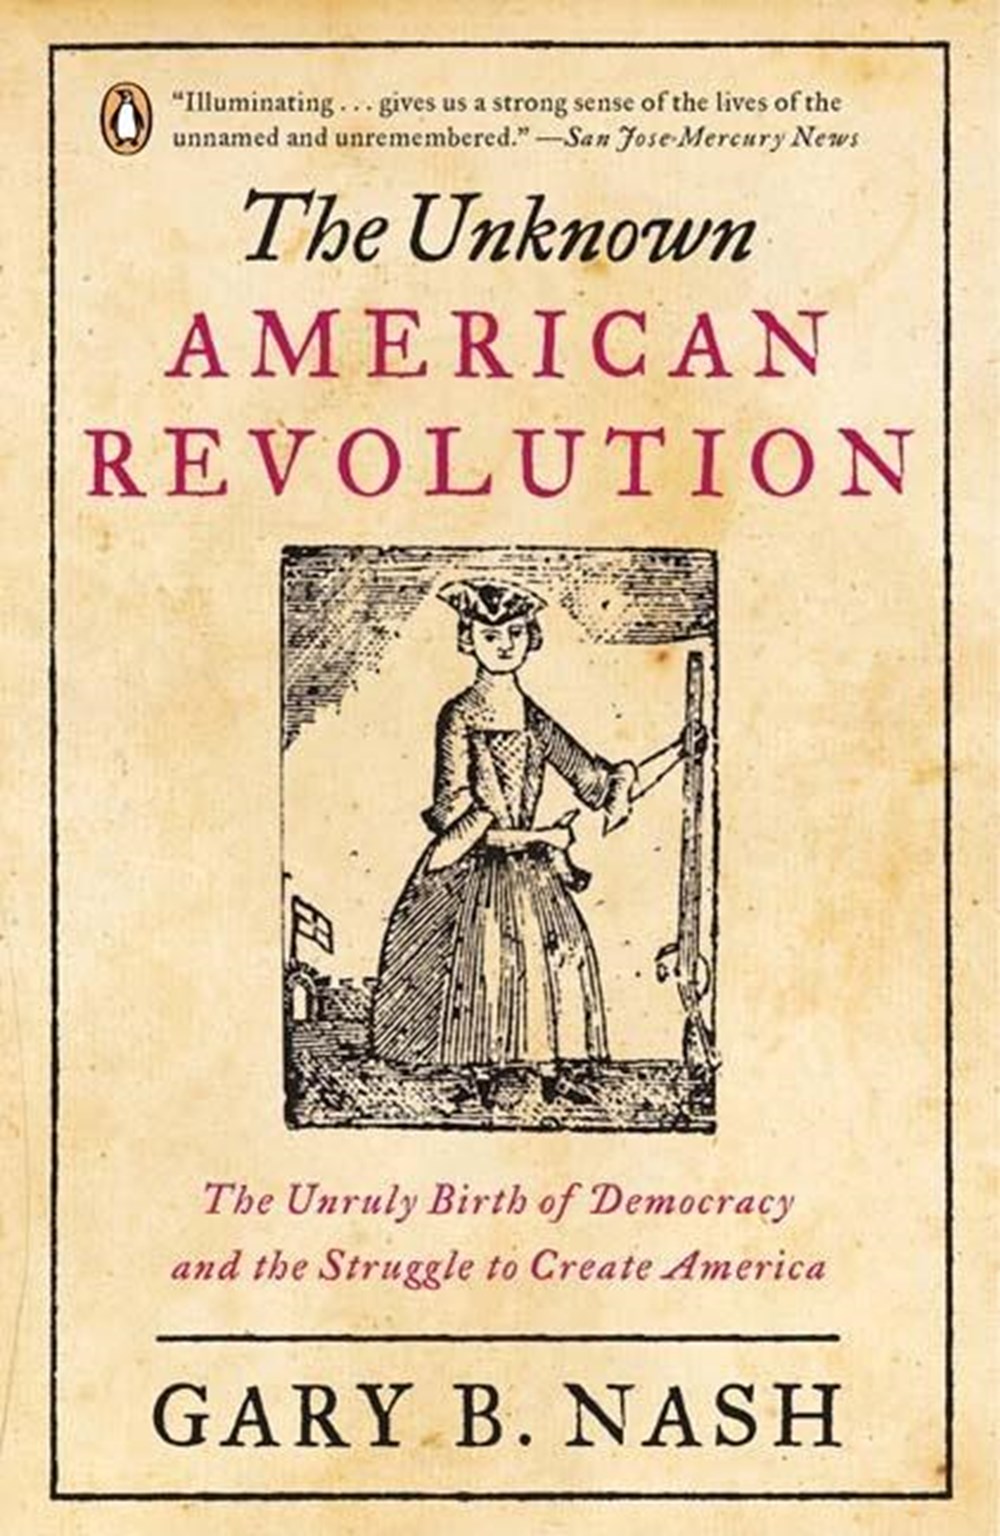 Unknown American Revolution: The Unruly Birth of Democracy and the Struggle to Create America